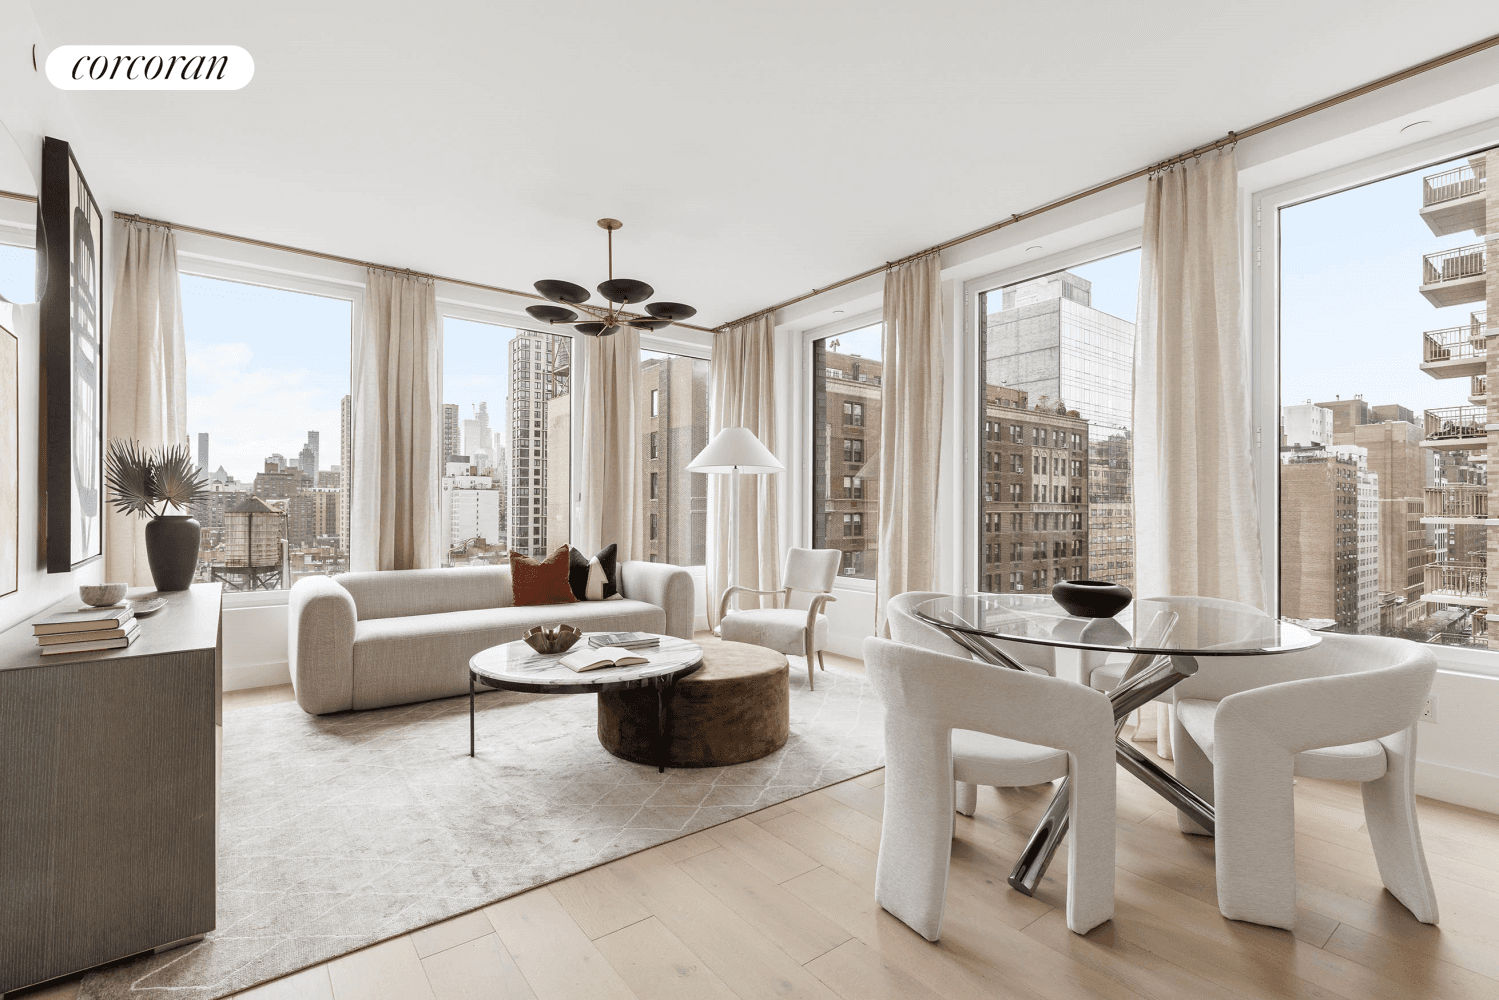 First showing Saturday 5 18 Open House from 10 11 30 by Appointment15th Floor at 323 East 79th StreetThree Bedroom Two Baths Powder Room Private Outdoor Space 1, 910 sqft323 ...